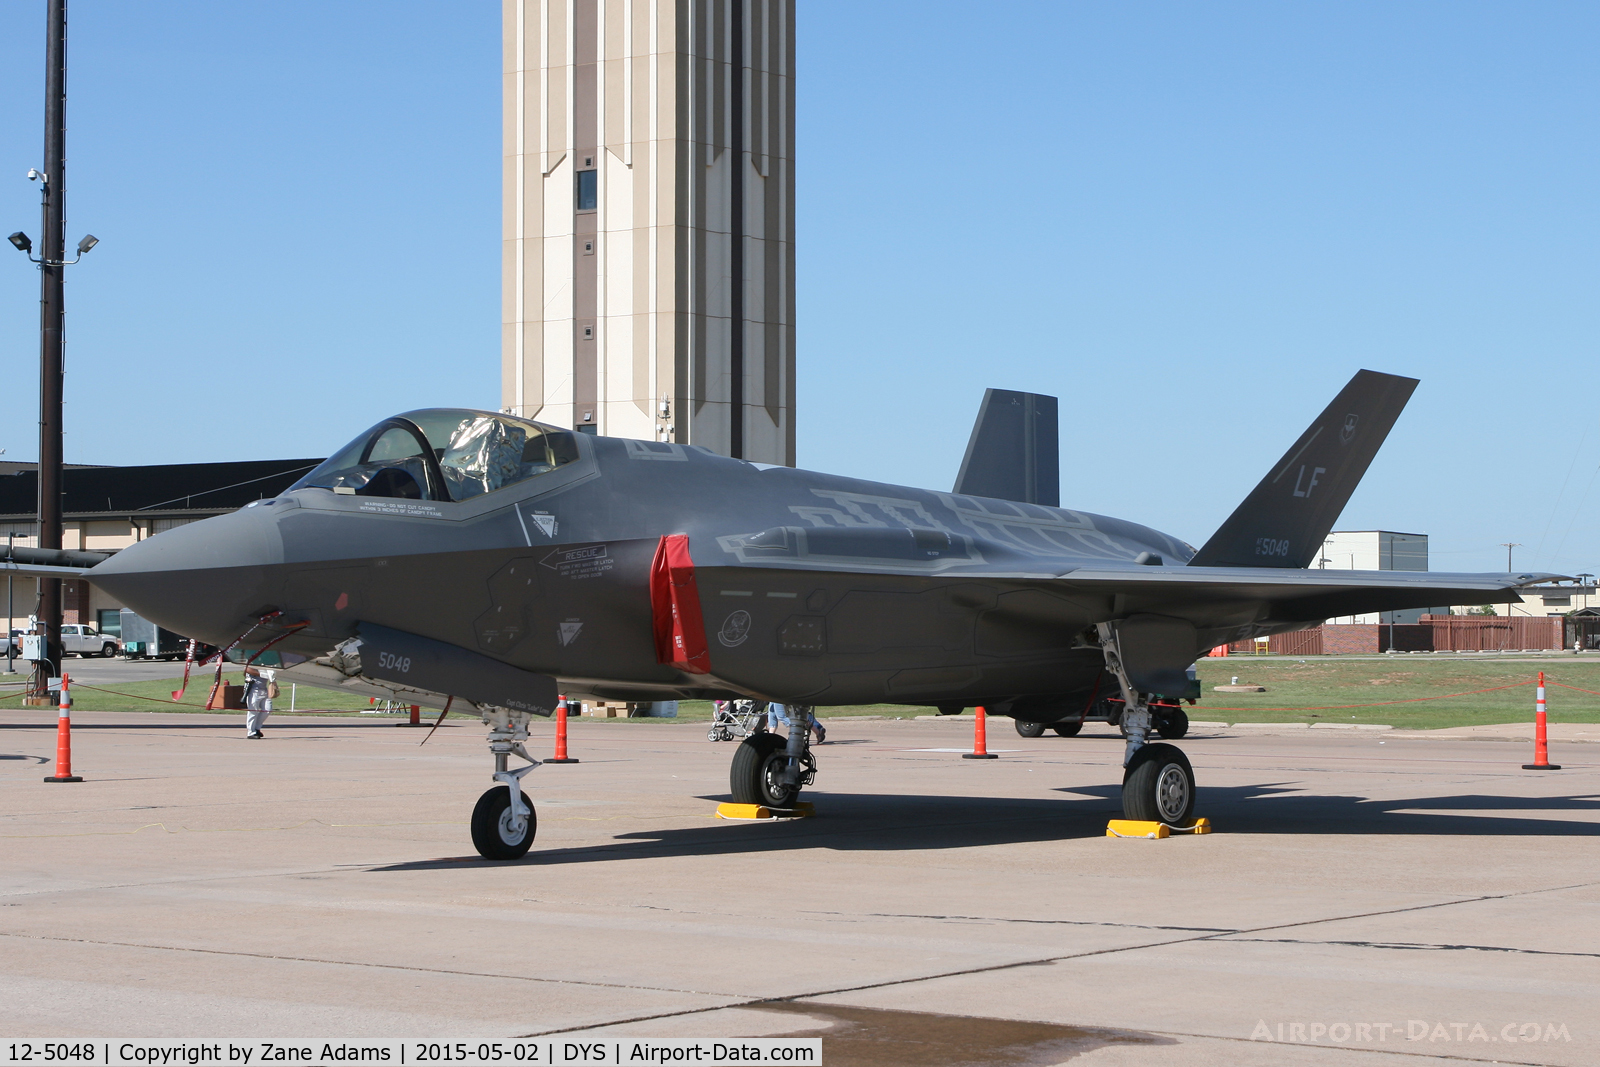 12-5048, 2012 Lockheed Martin F-35A Lightning II C/N AF-59, At the 2015 Big Country Airshow - Dyess AFB, Texas